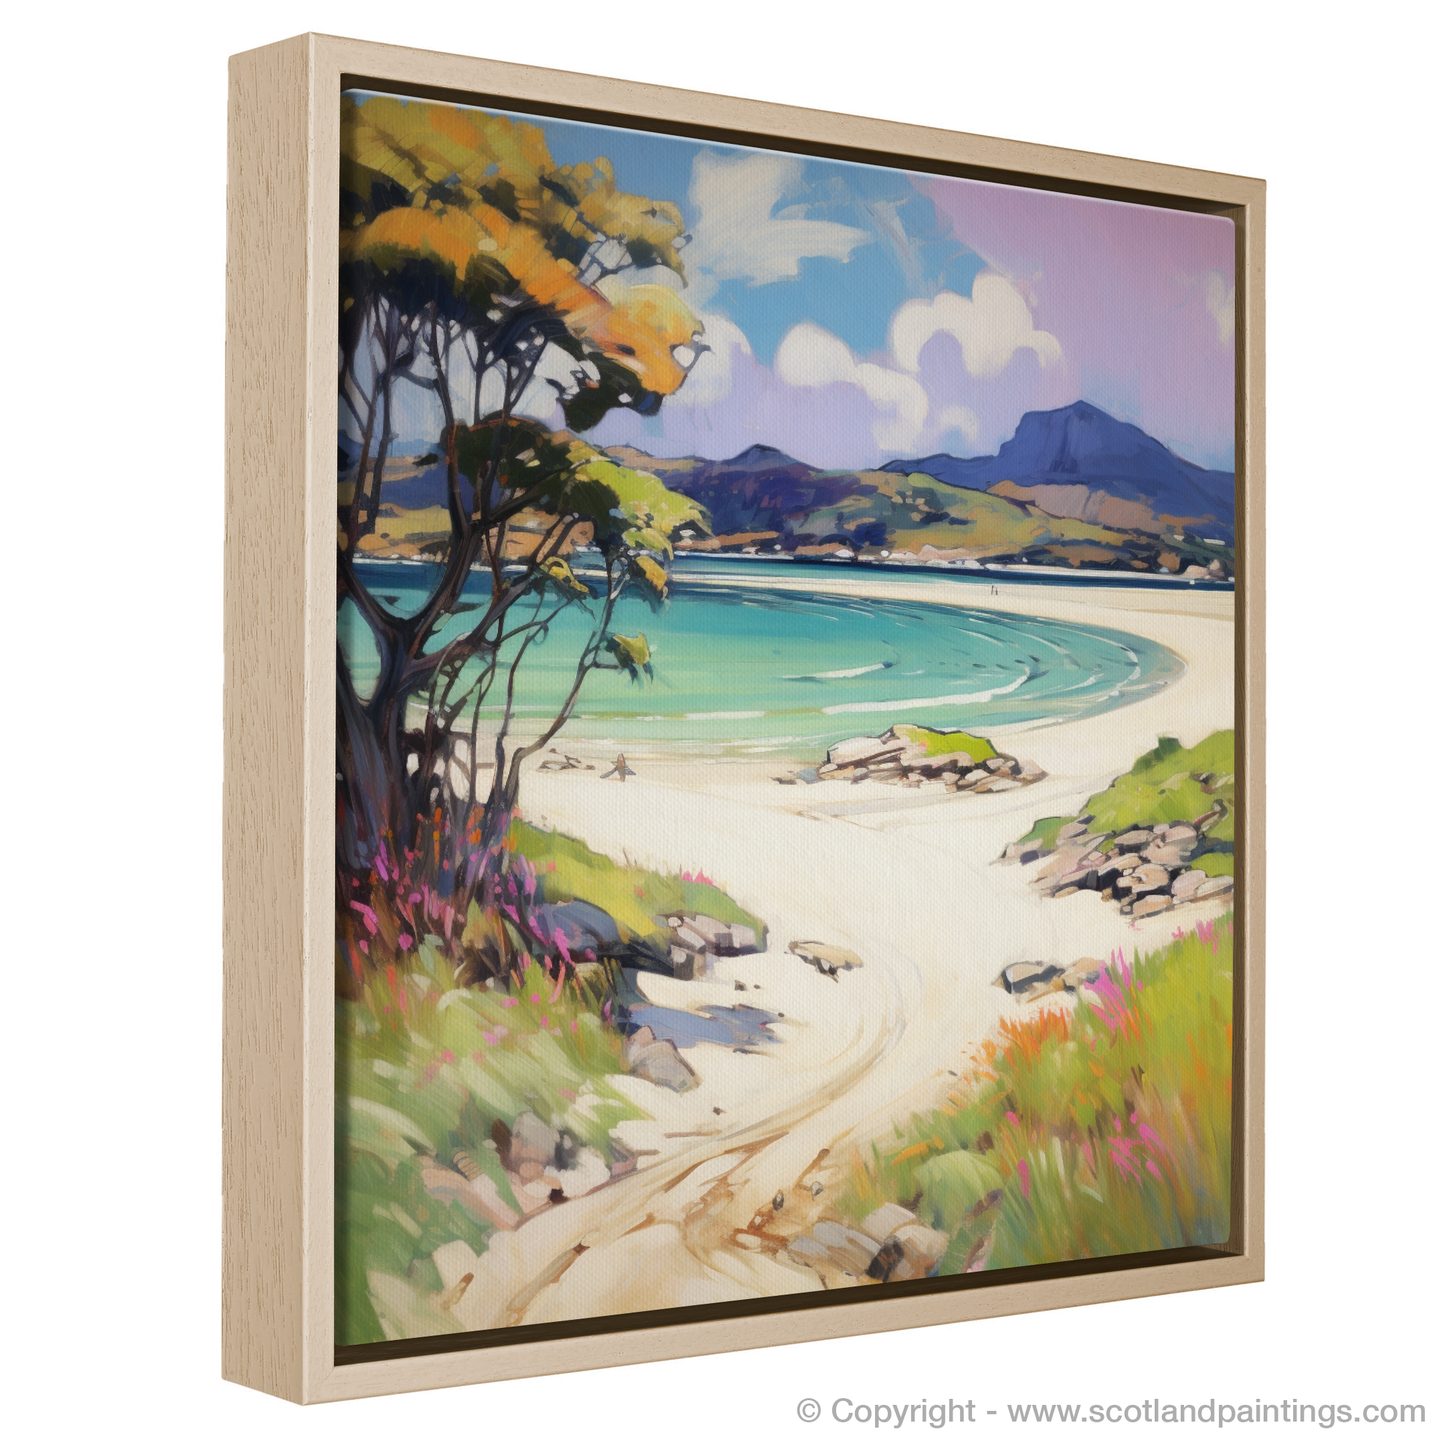 Painting and Art Print of Silver Sands of Morar in summer entitled "Vivid Sands of Morar: A Fauvist Ode to Scottish Summers".